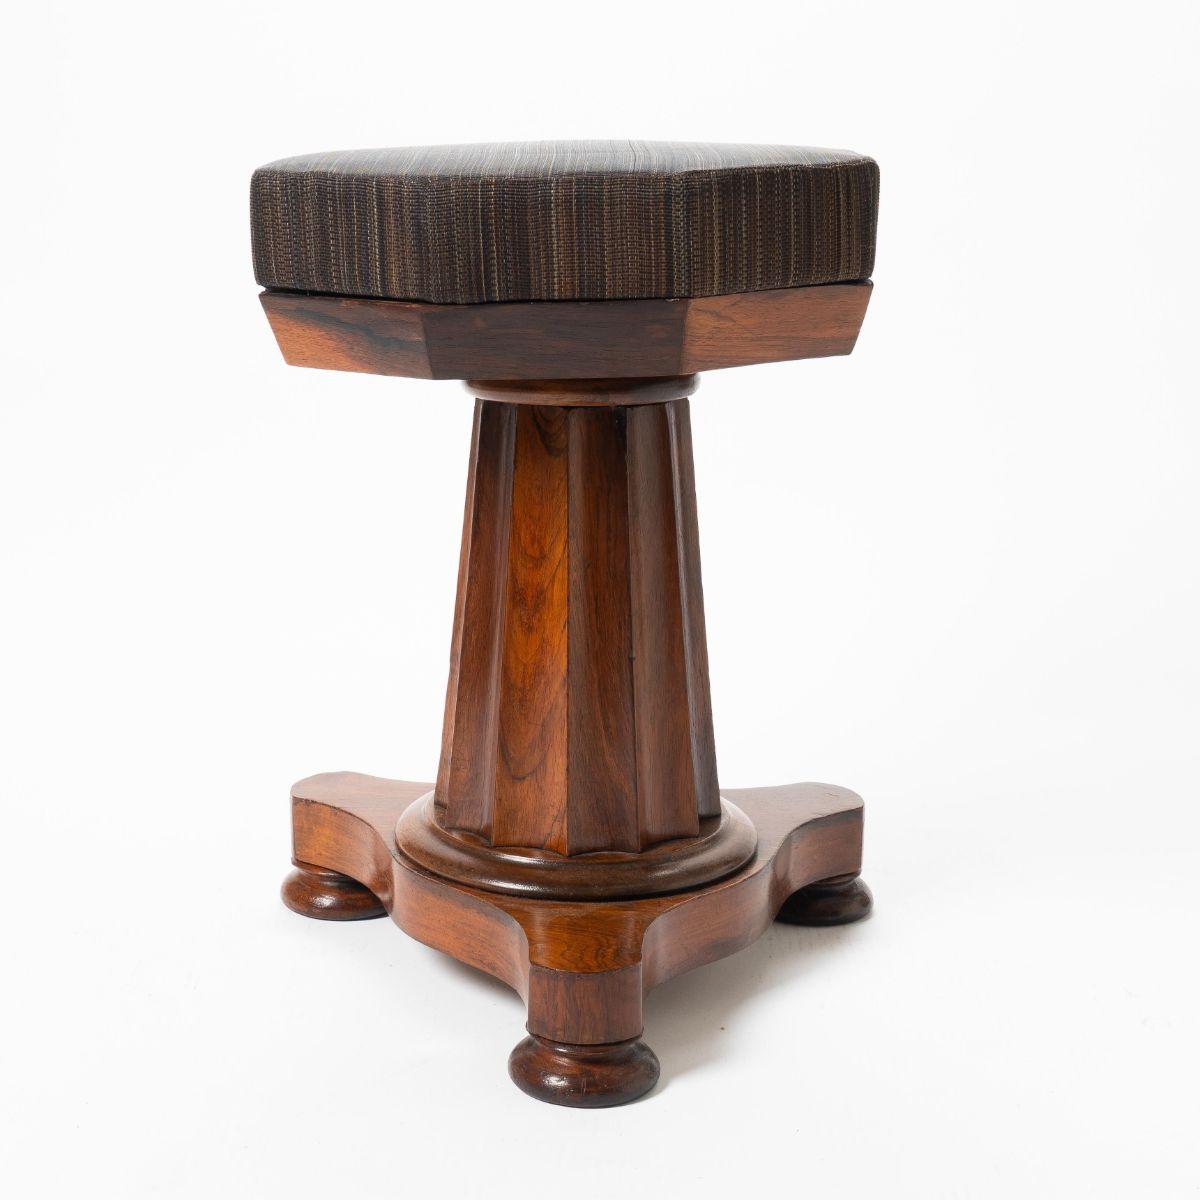 American neoclassic upholstered seat piano stool. The seat rests on a fluted and truncated columnar pedestal with trefoil platform base on turned and suppressed bun feet. Rosewood and rosewood veneers on eastern white pine. The seat is newly